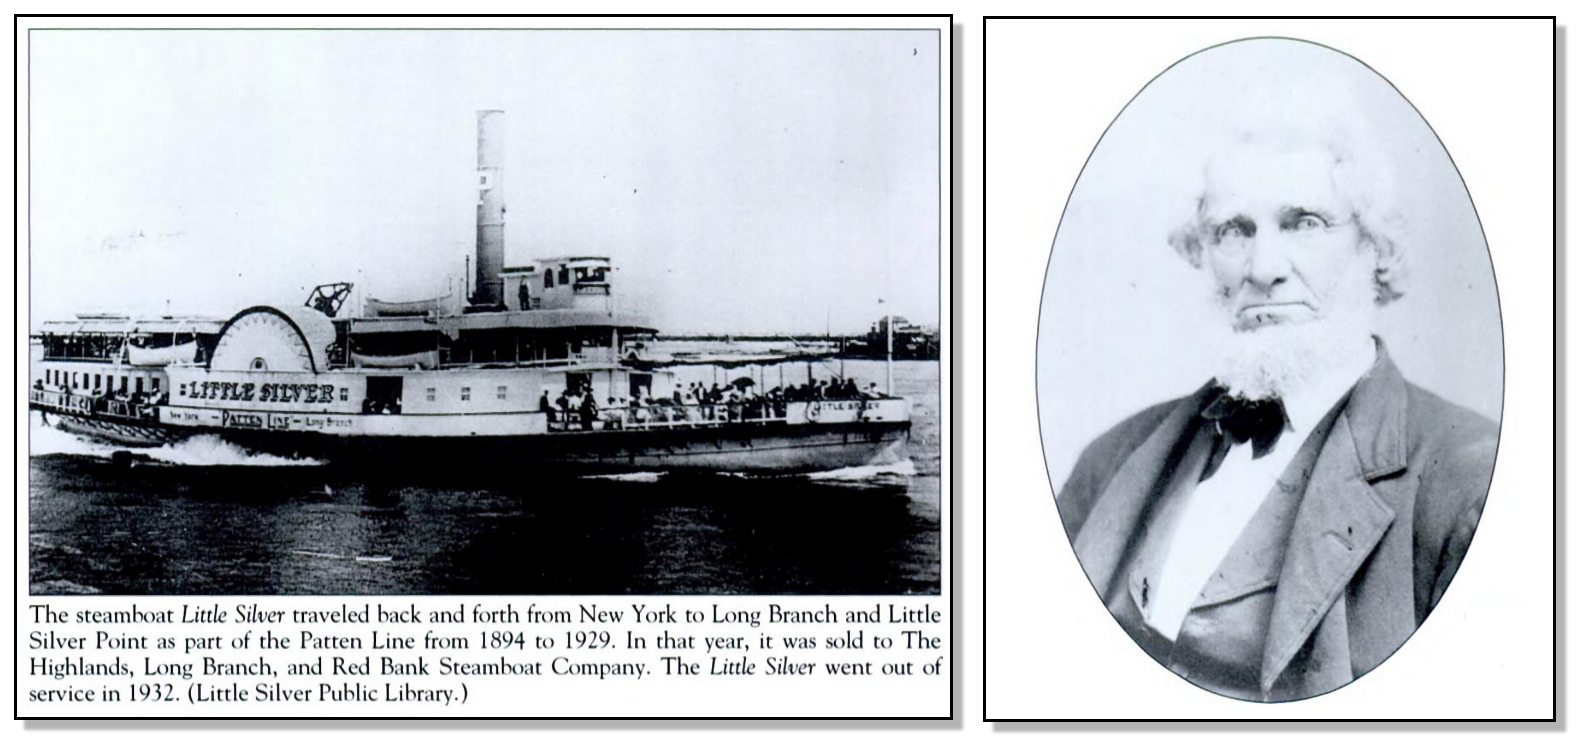 Left: The SS Little Silver; image courtesy Dorn’s Historical Images, used with permission.  Right: Captain Richard Borden, a.k.a. “Uncle Dick” Borden, owner-operator of the Silver Bay House resort in Little Silver. Image detail courtesy Schnitzspahn, Karen L. (1996). Images of America: Little Silver.  Arcadia Publishing, Charleston, S.C.